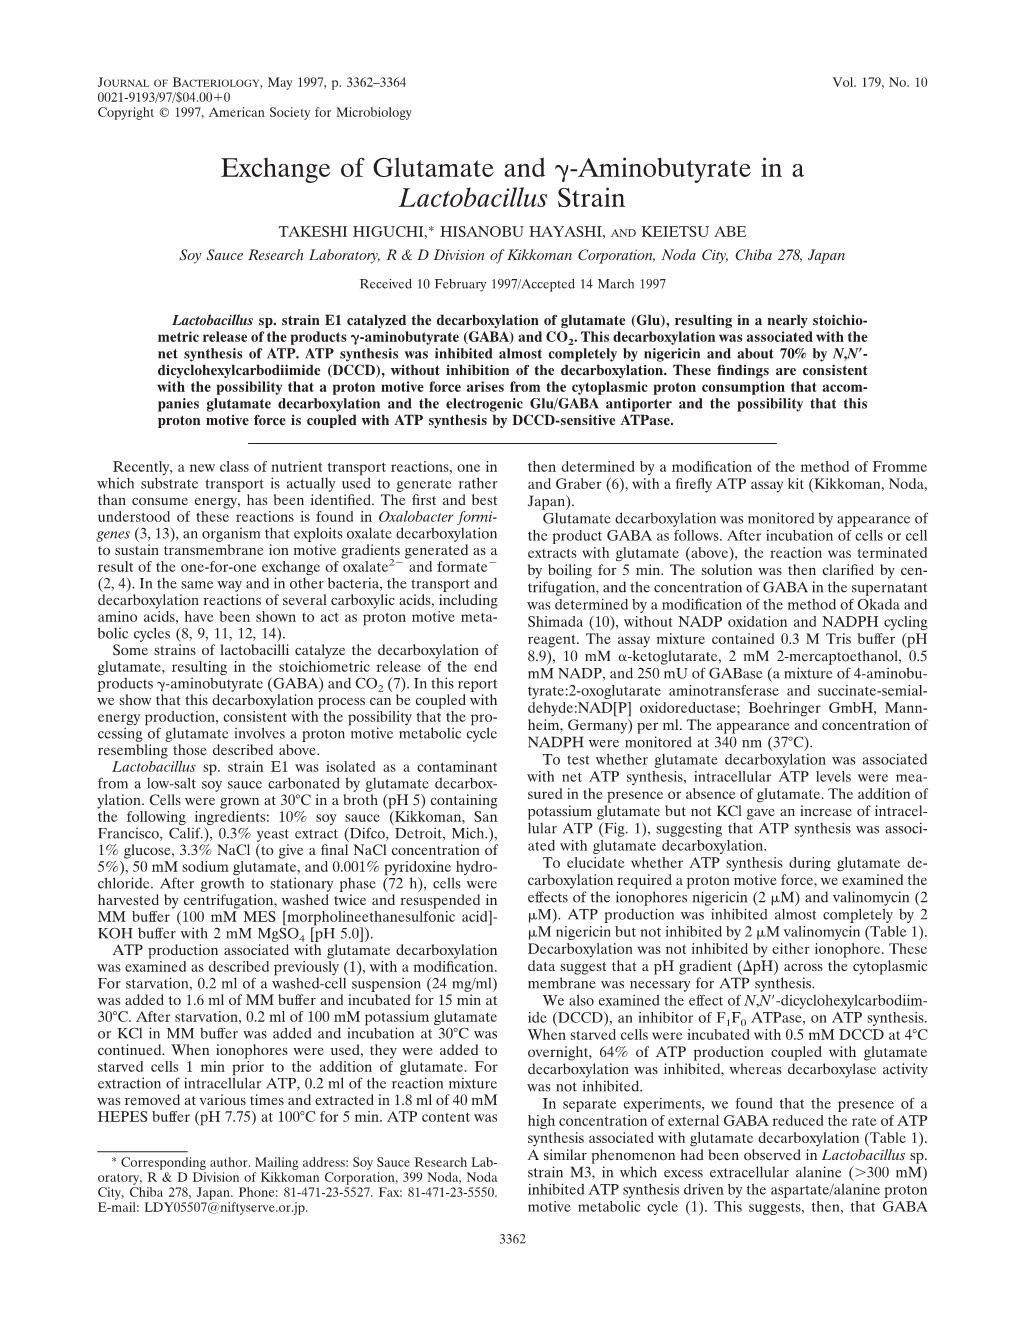 Exchange of Glutamate and Γ-Aminobutyrate in A